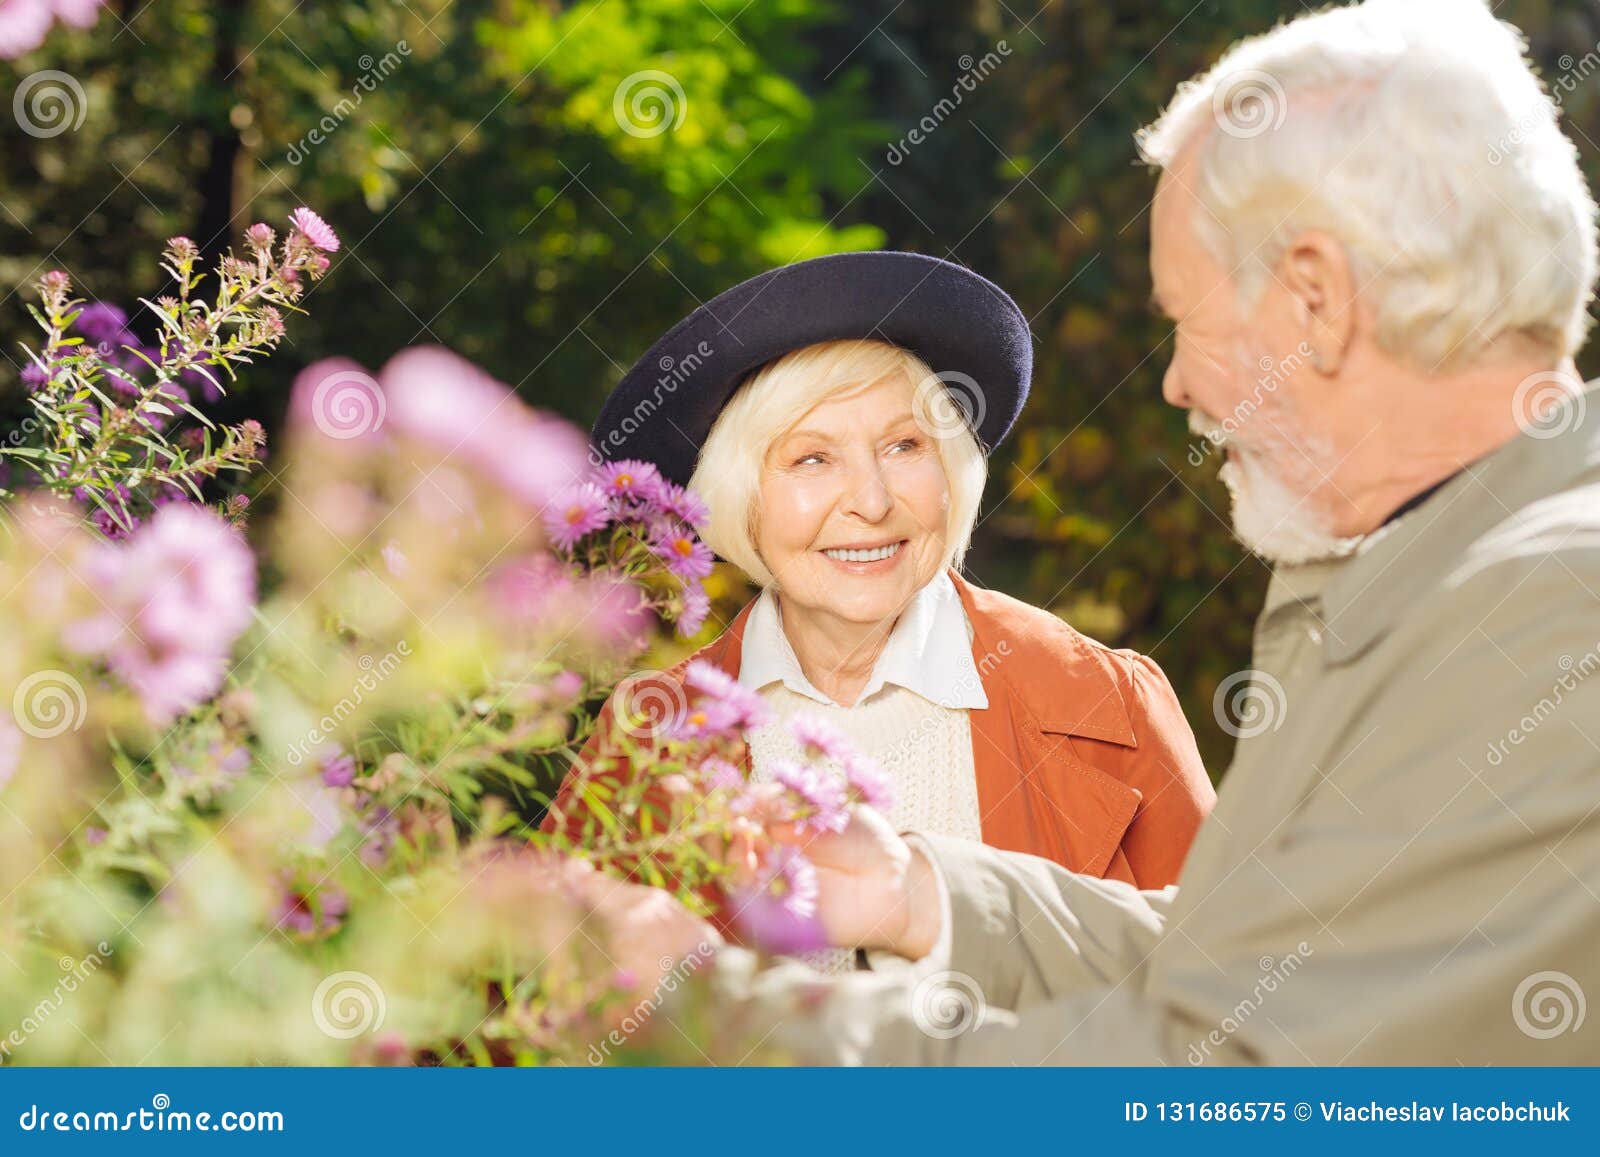 Delighted Aged Couple Standing Near the Flower Bed Stock Image - Image ...